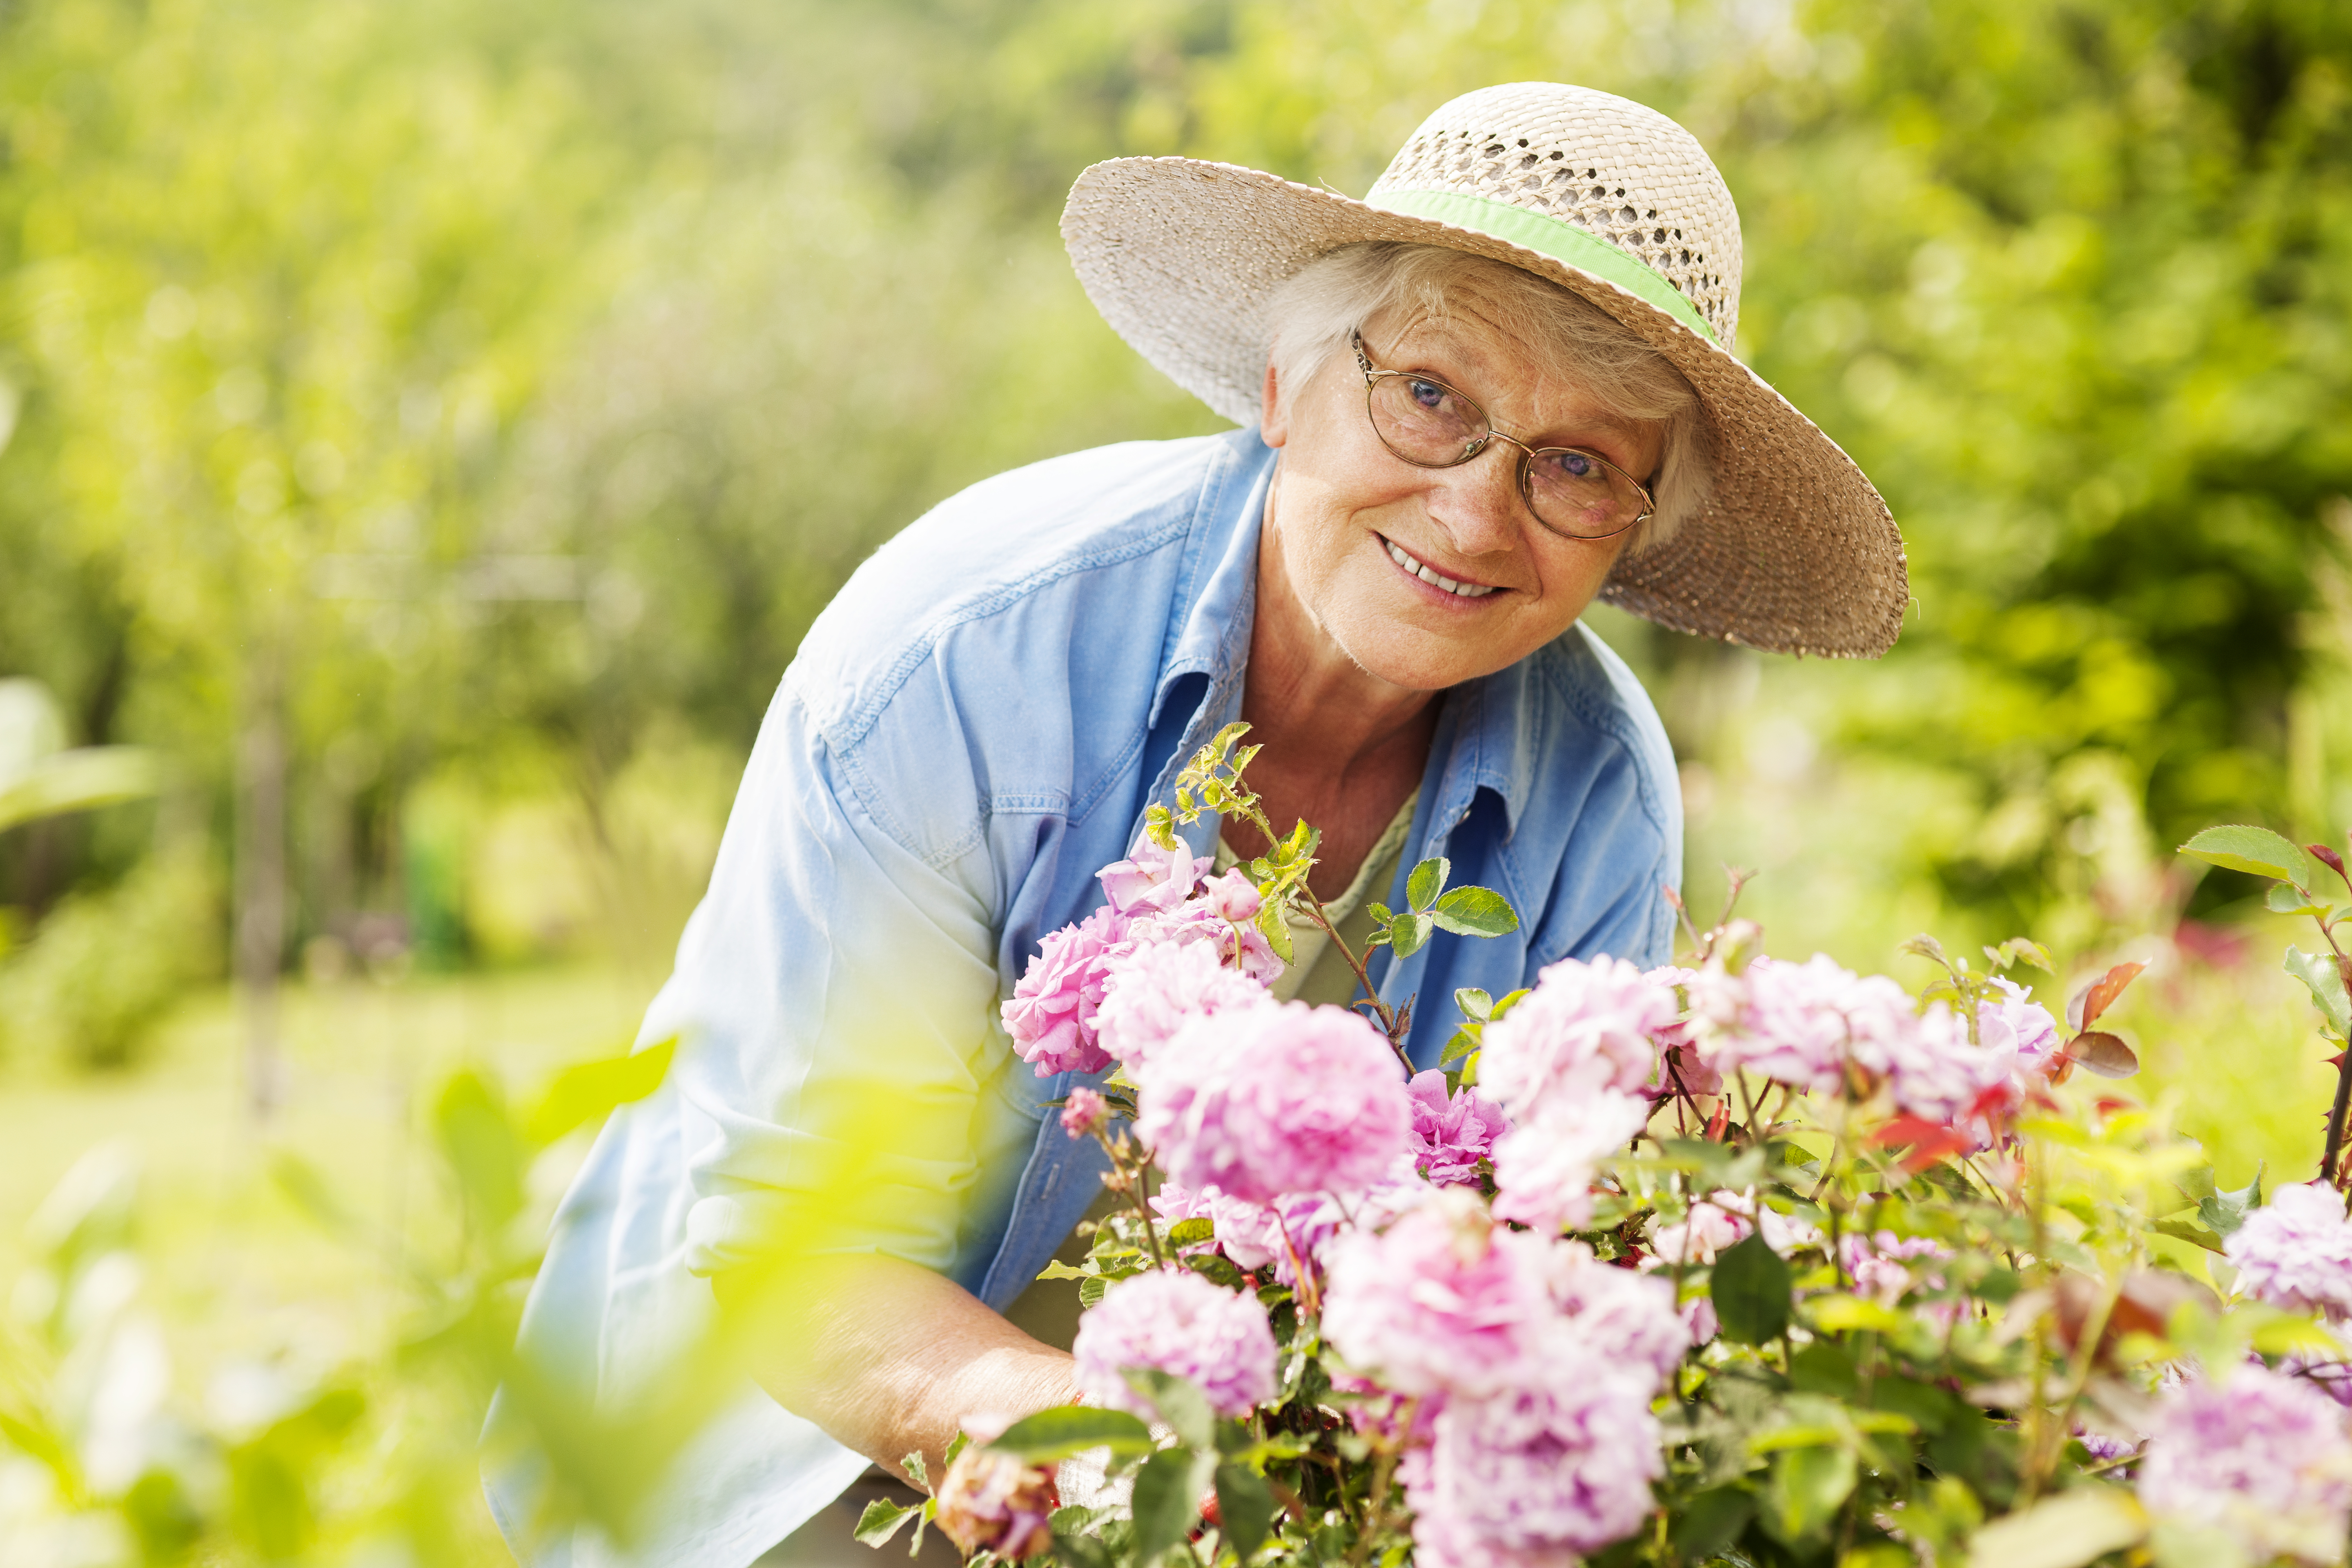 Senior woman with flowers in garden | Source: Getty Images